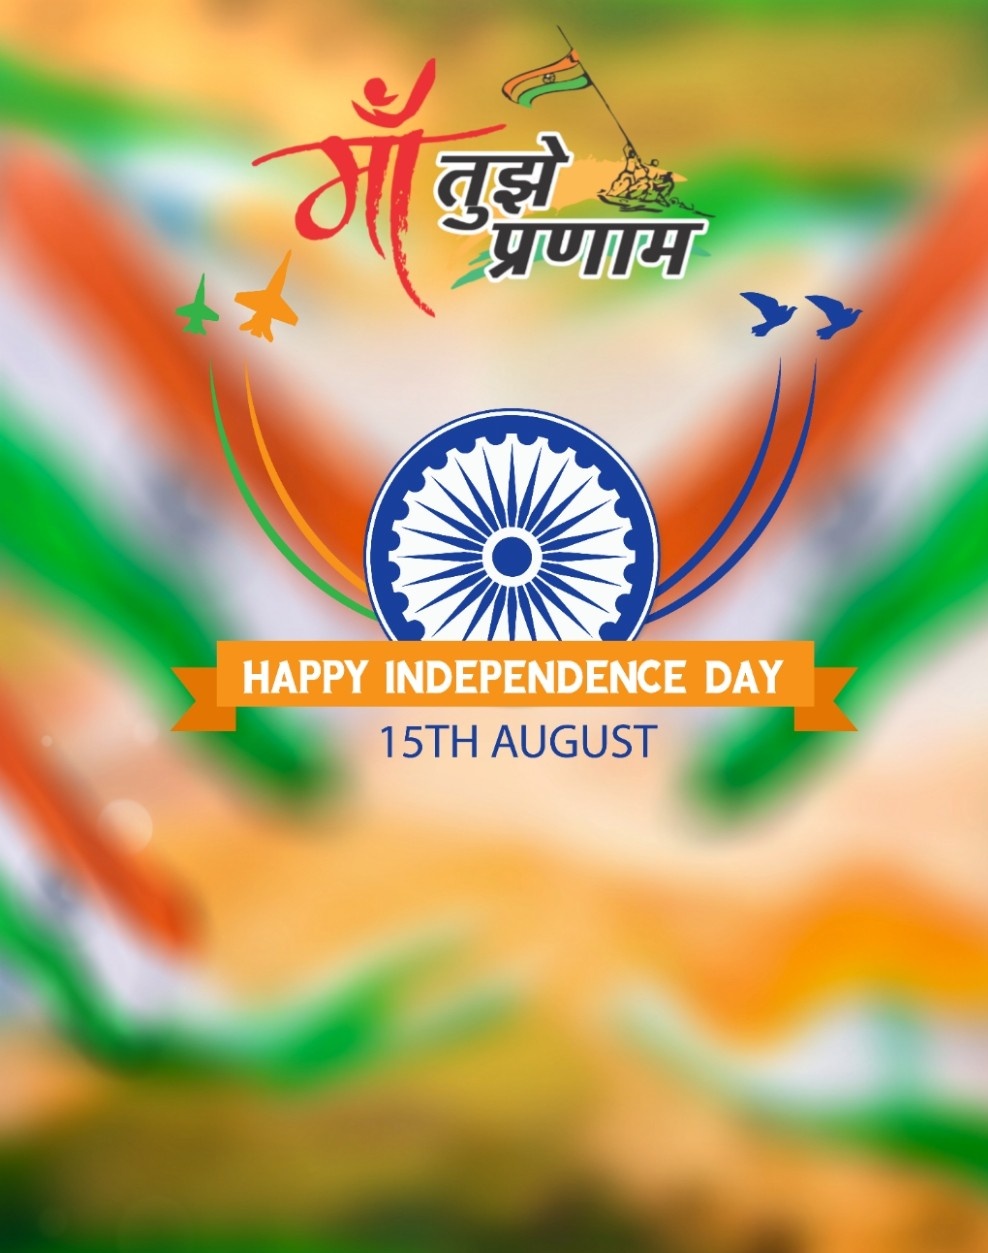 HD 15 August Independence Day Image Download